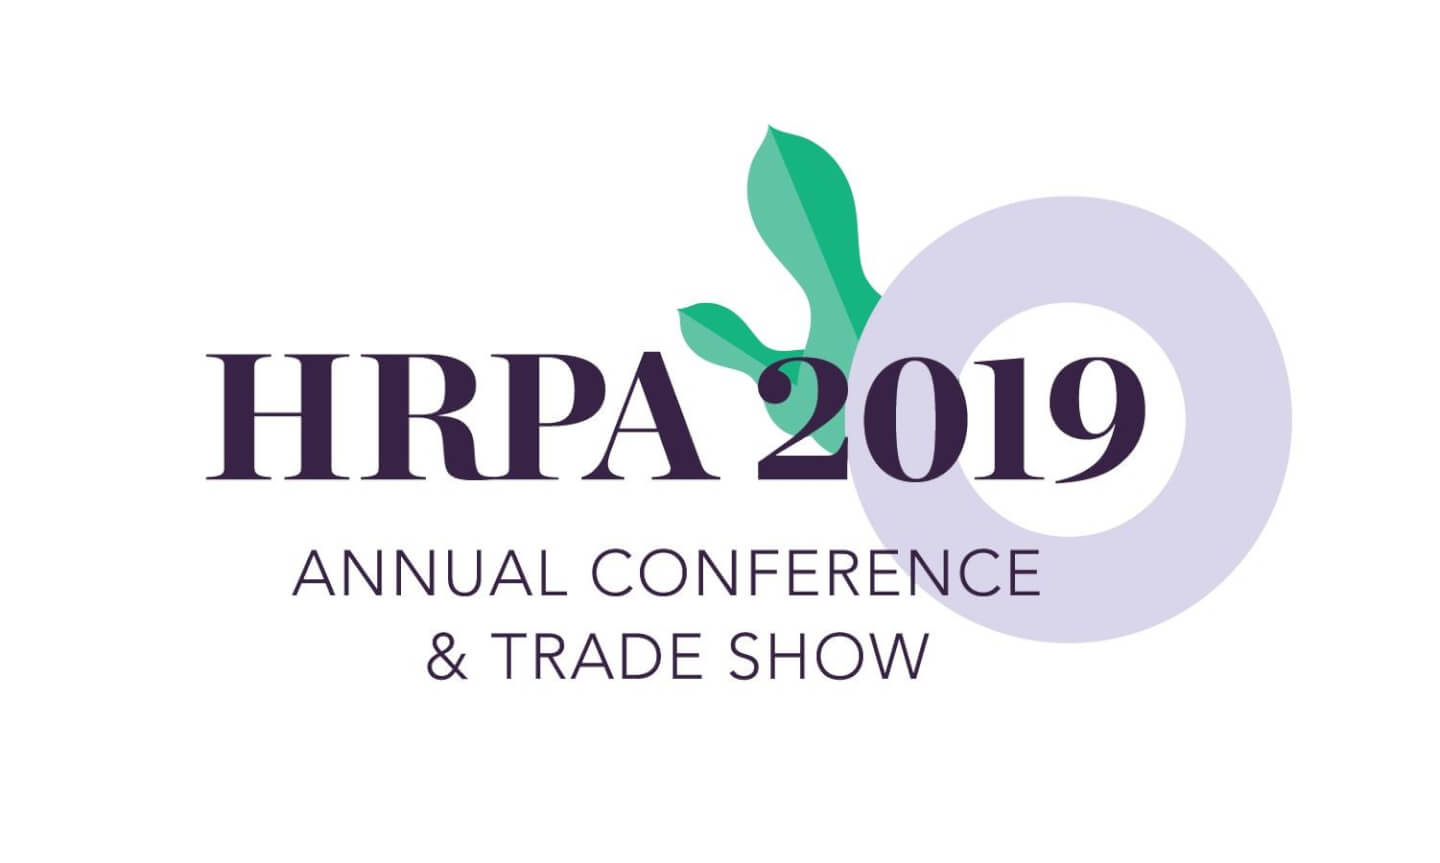 SPB Exhibitor and Speaker at the HRPA 2019 Annual Conference and